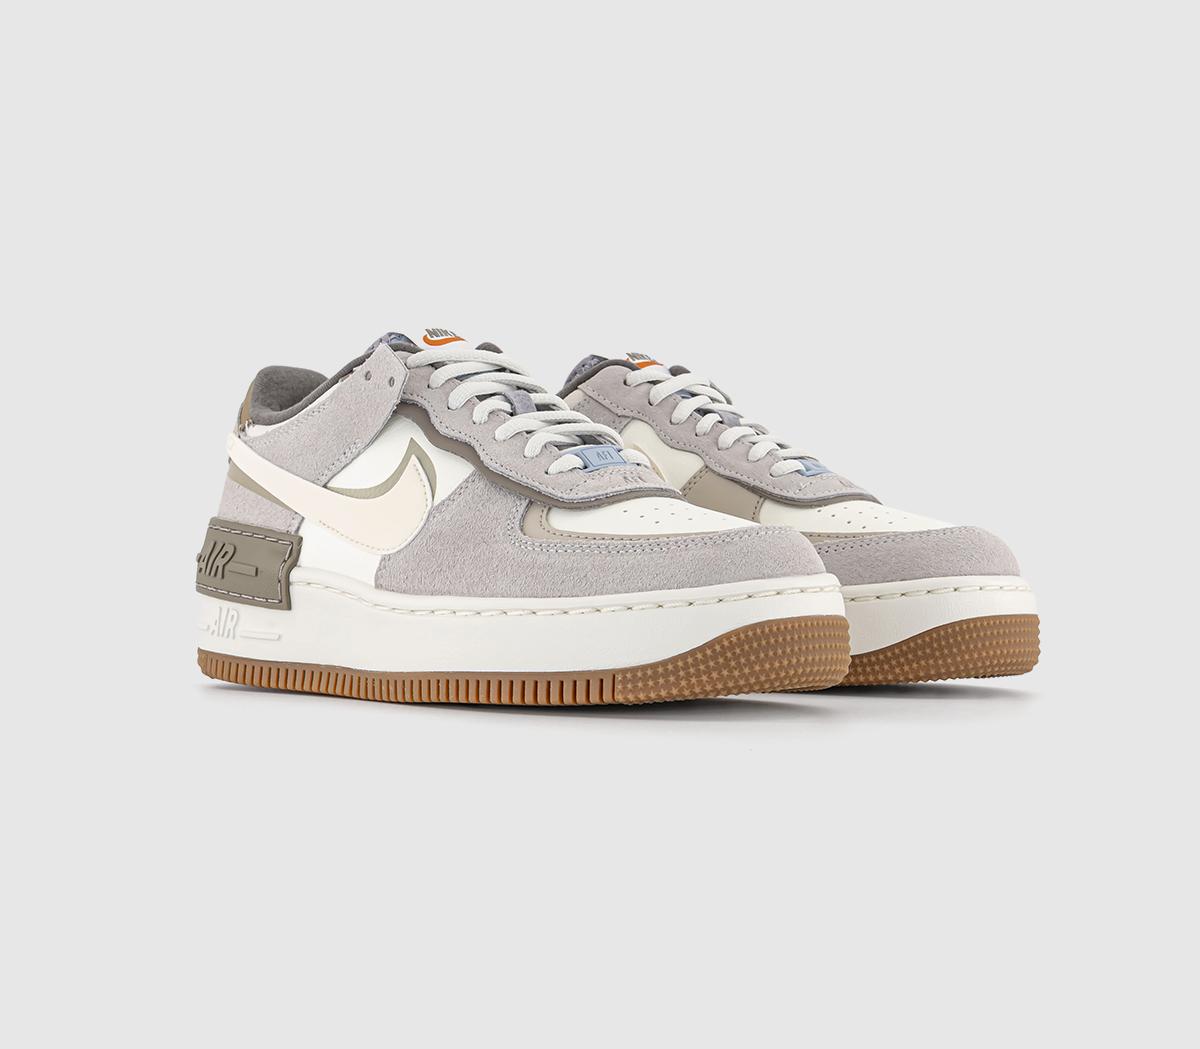 Nike Air Force 1 Shadow Trainers Sail Pale Ivory Grey Fog Provence Purple Cave White, 7